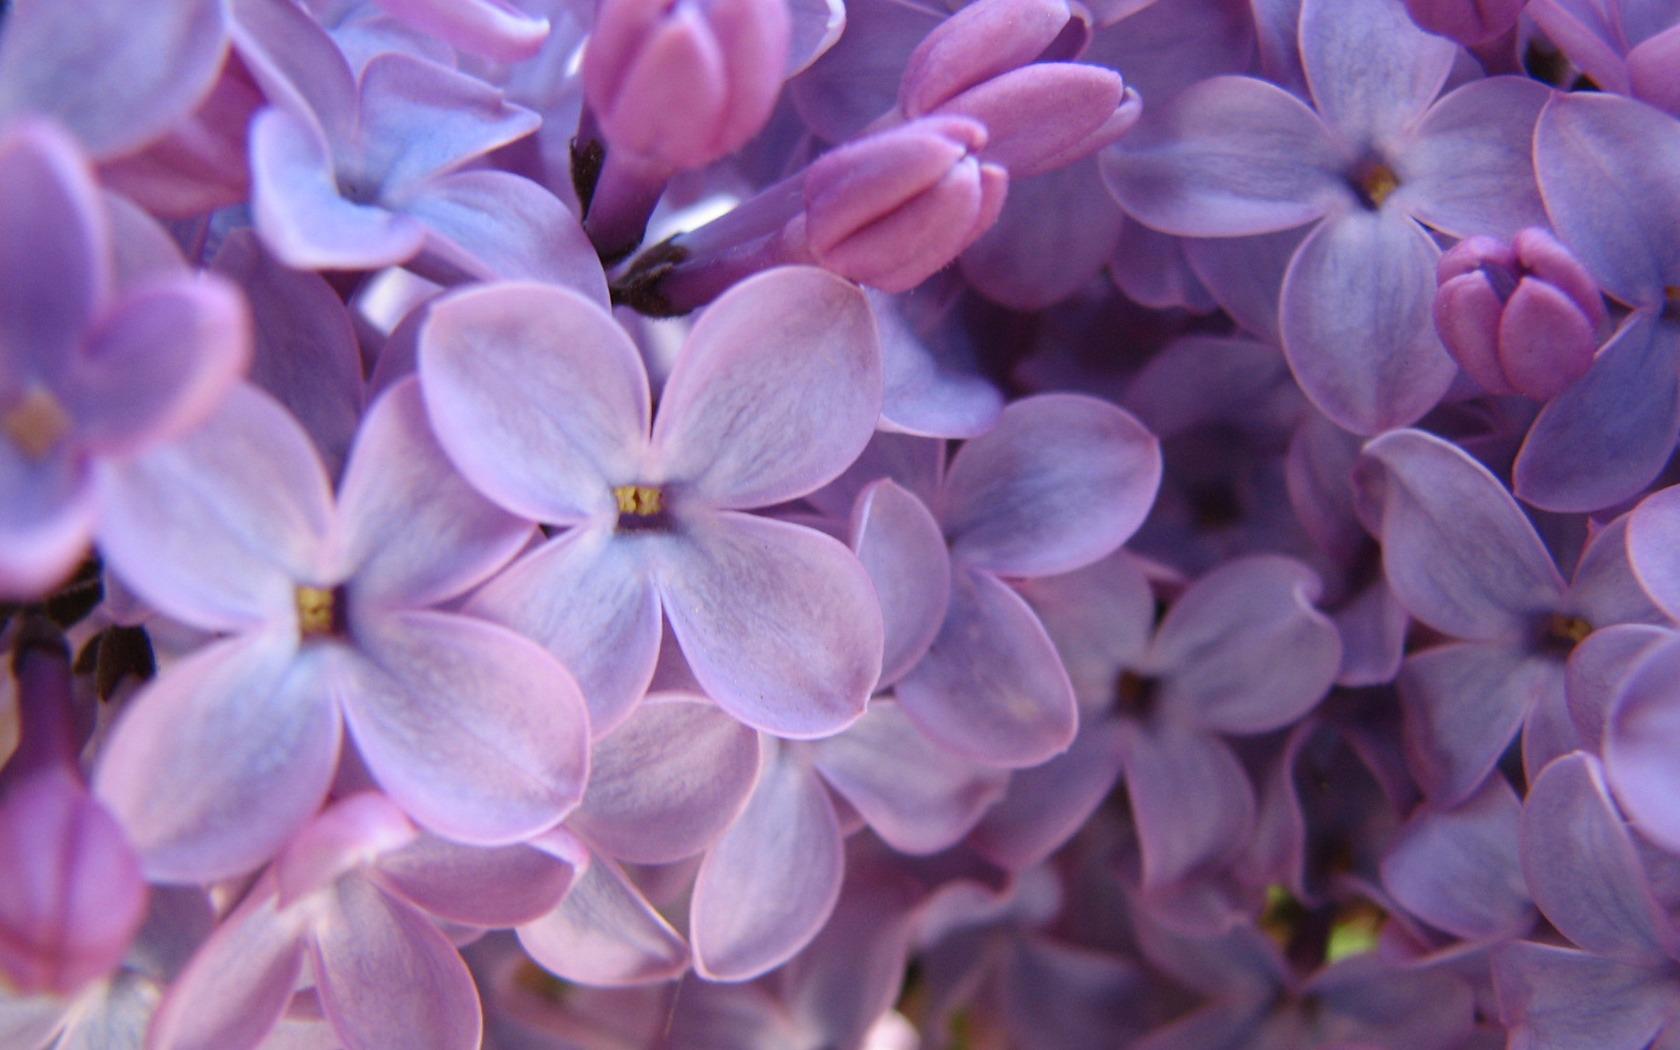 Purple Lilac Wallpaper Flowers Nature Wallpaper in jpg format for free download